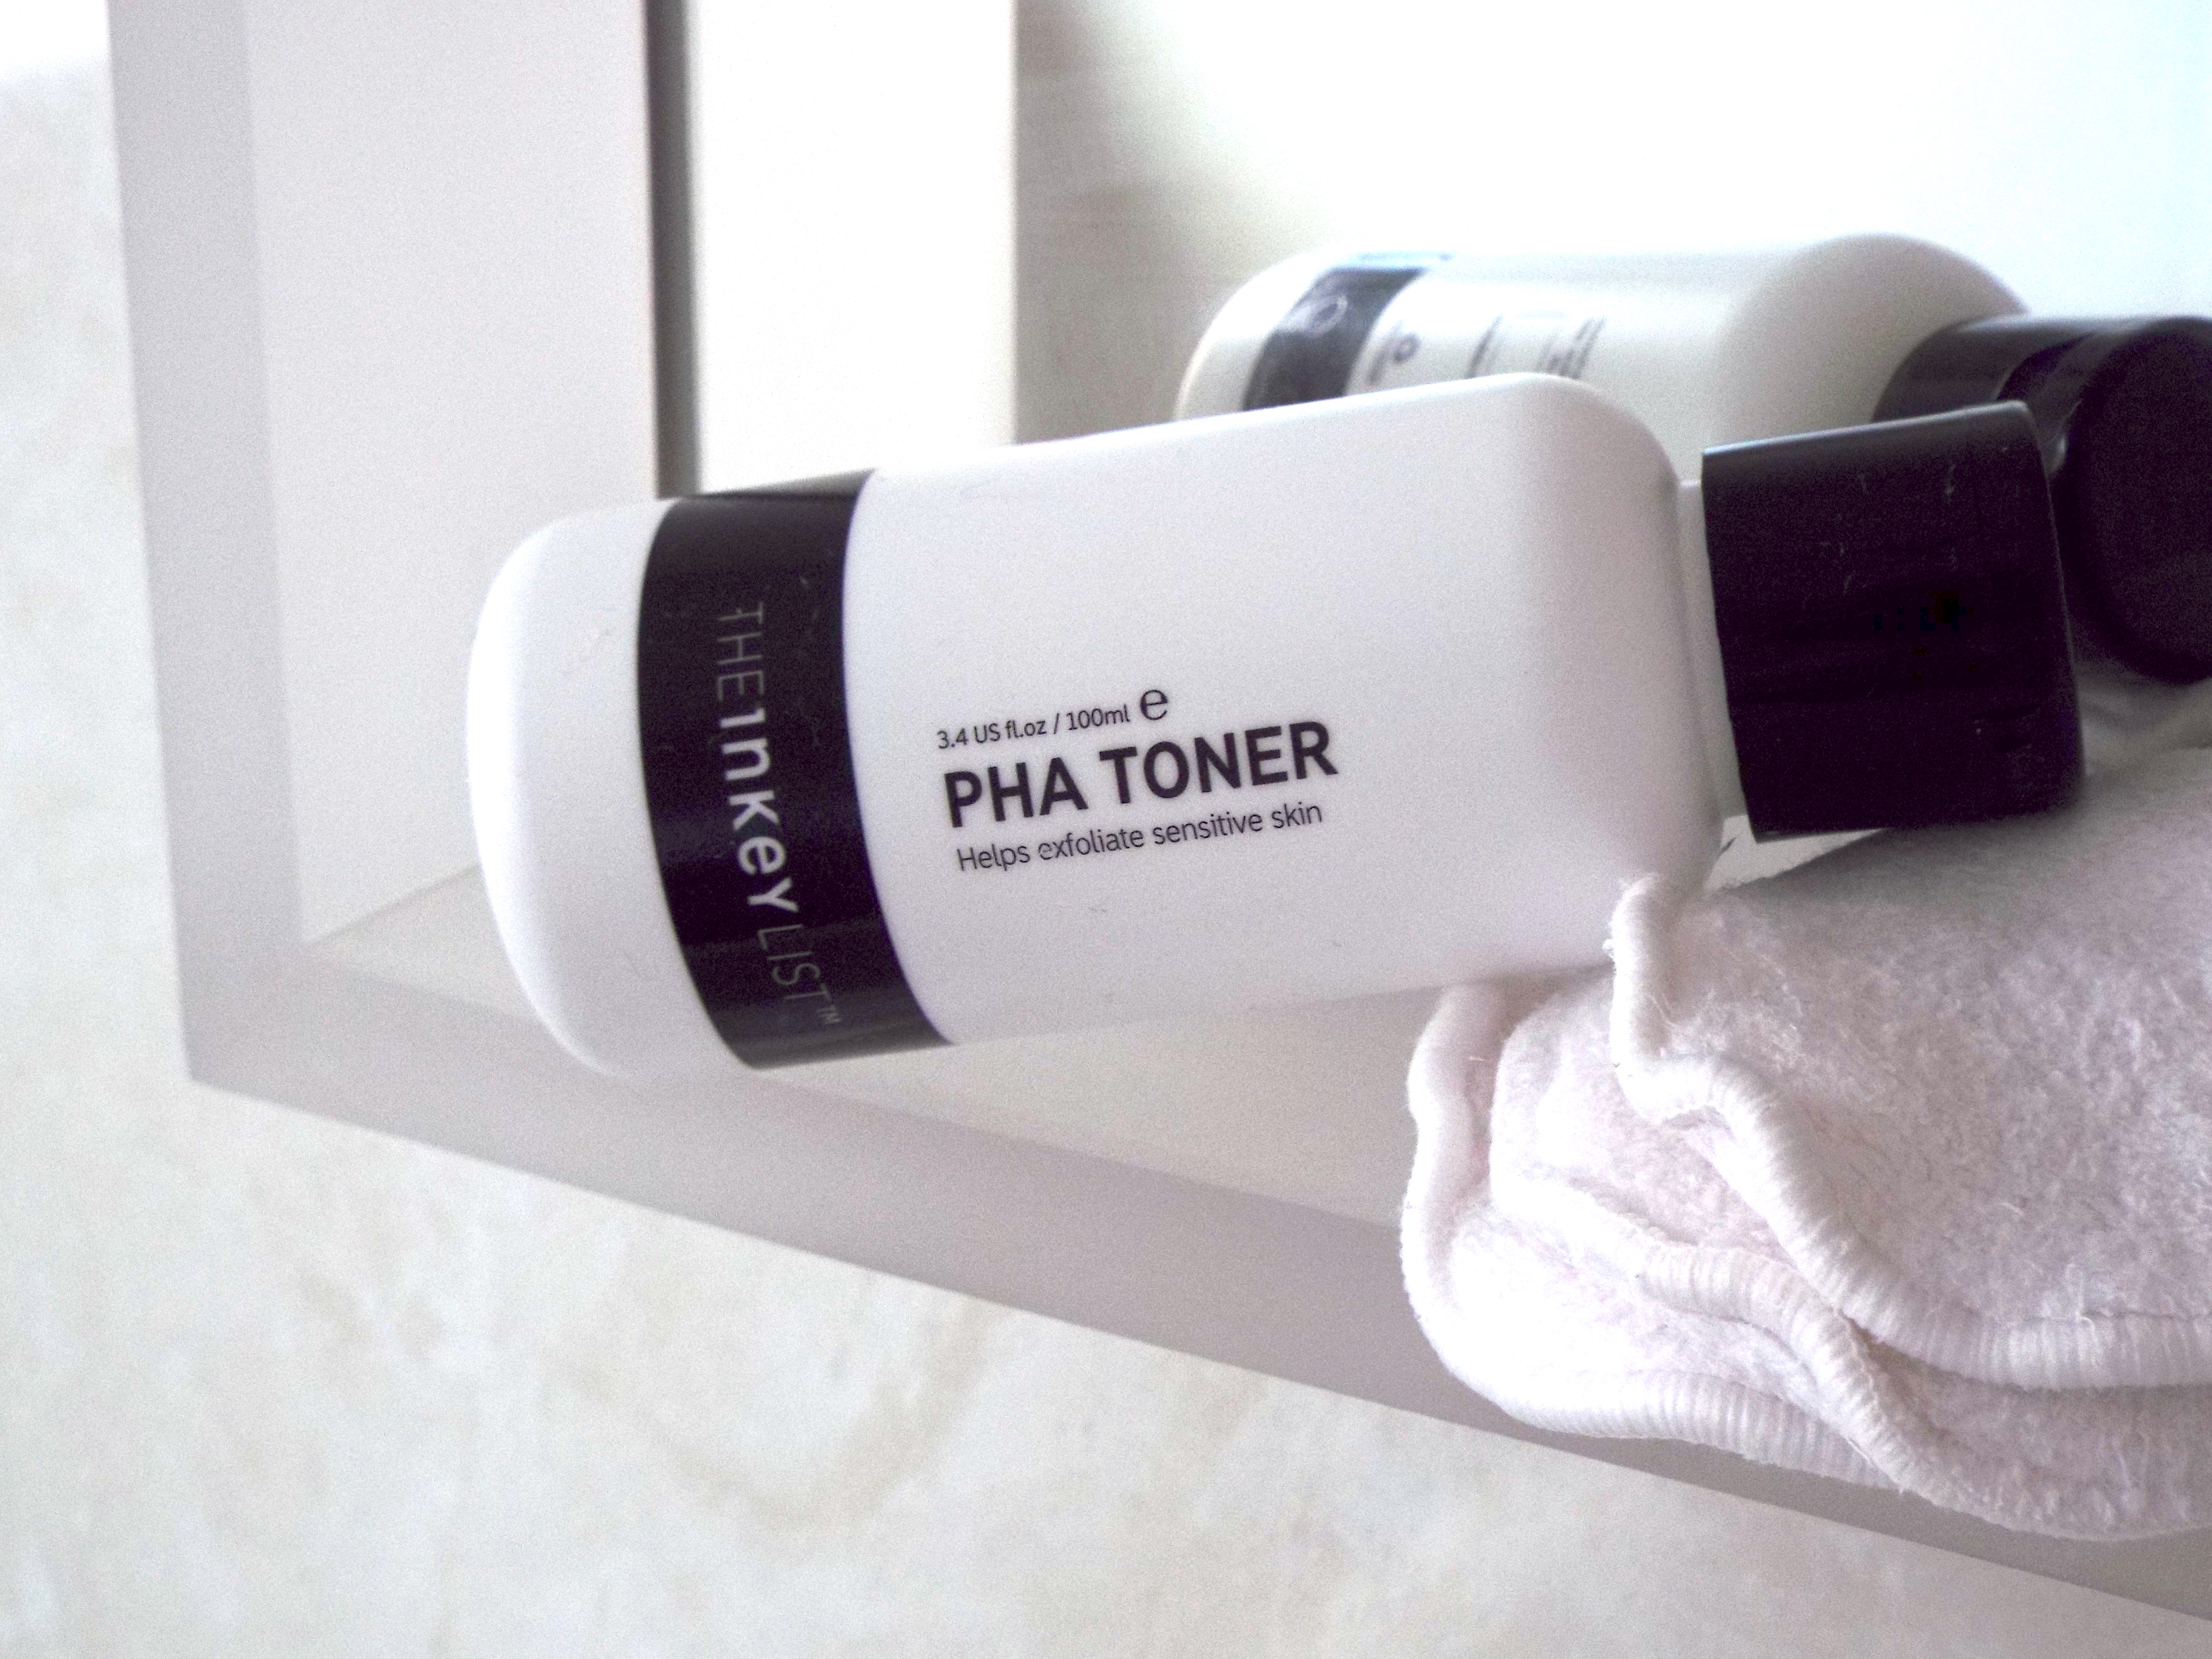 White and black Inkey List PHA Toner bottle lay down on bathroom mirror-side, resting on pile of cotton pads.